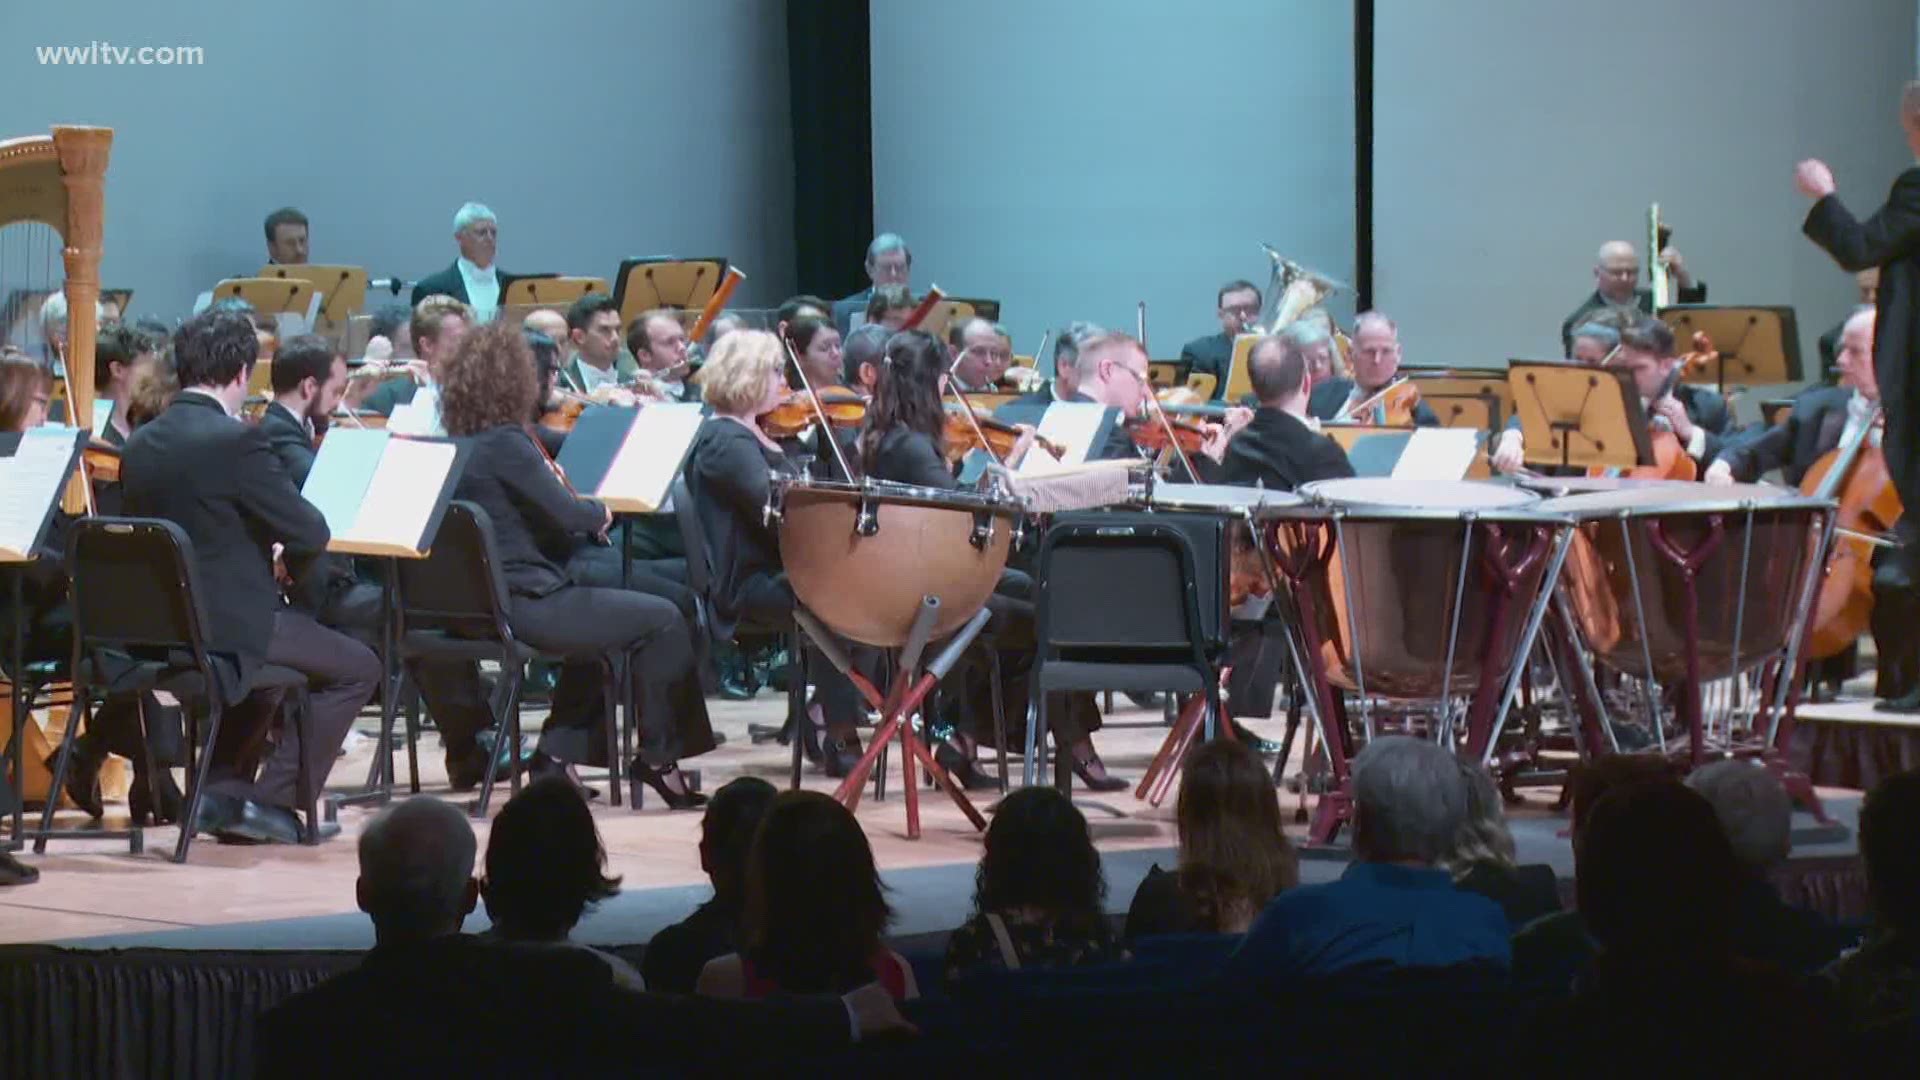 The Louisiana Philharmonic Orchestra unveils a reimagined season because of COVID-19. Interim Executive Director Scott Harrison discusses the offerings.